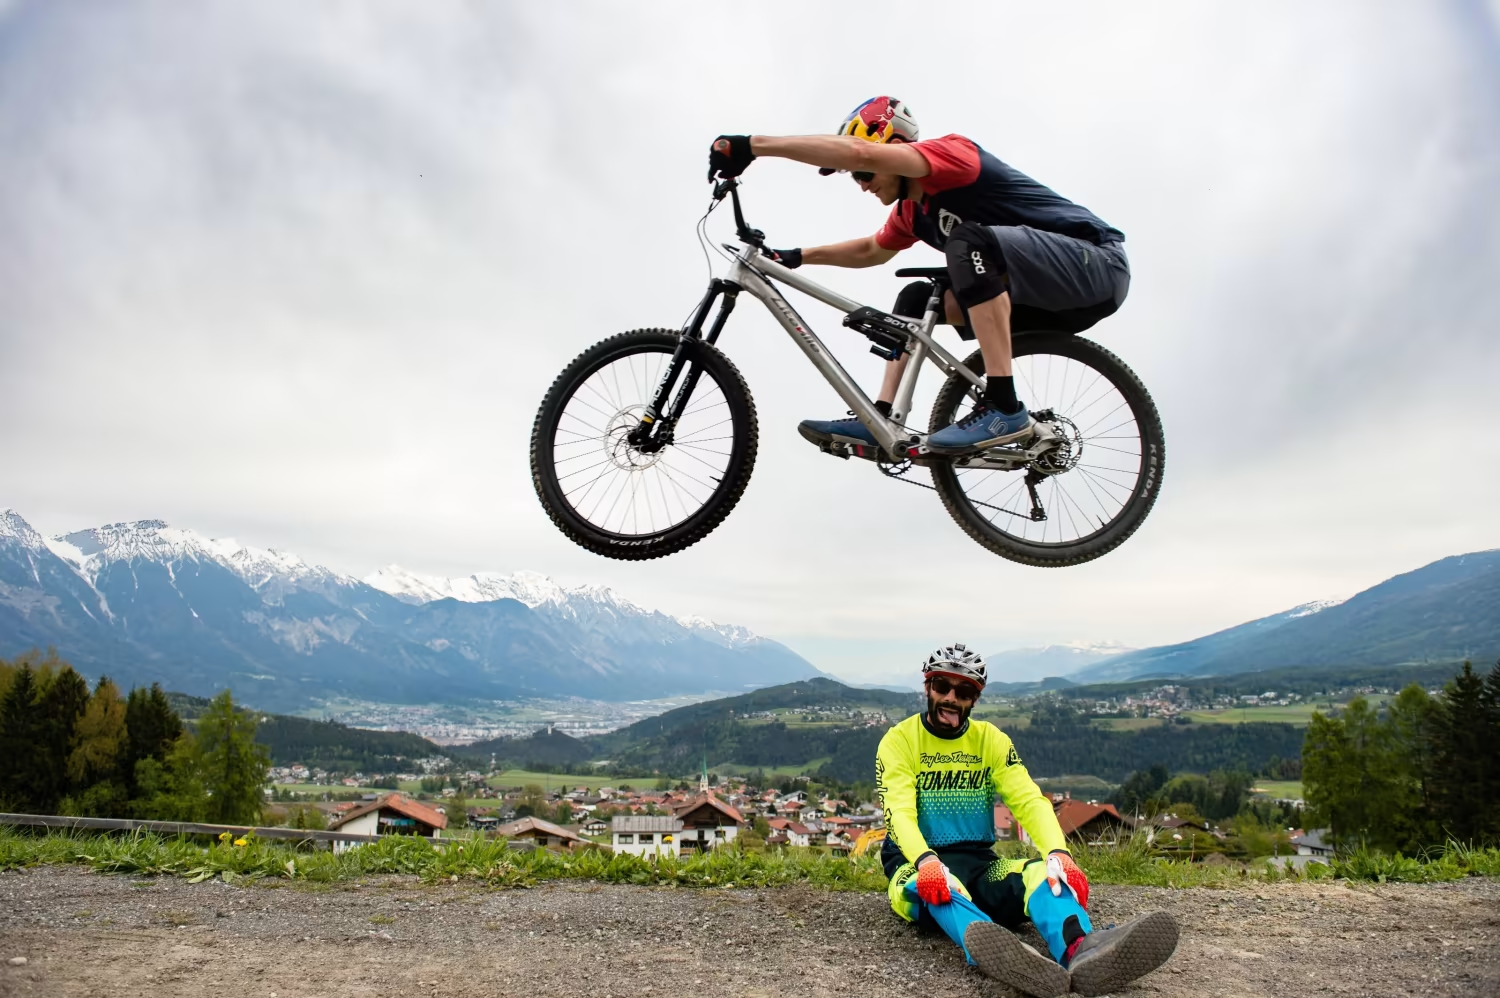 Doing a bunny hop on a mountain bike is similar to a bump jump, but it is considered one of the more advanced tricks.